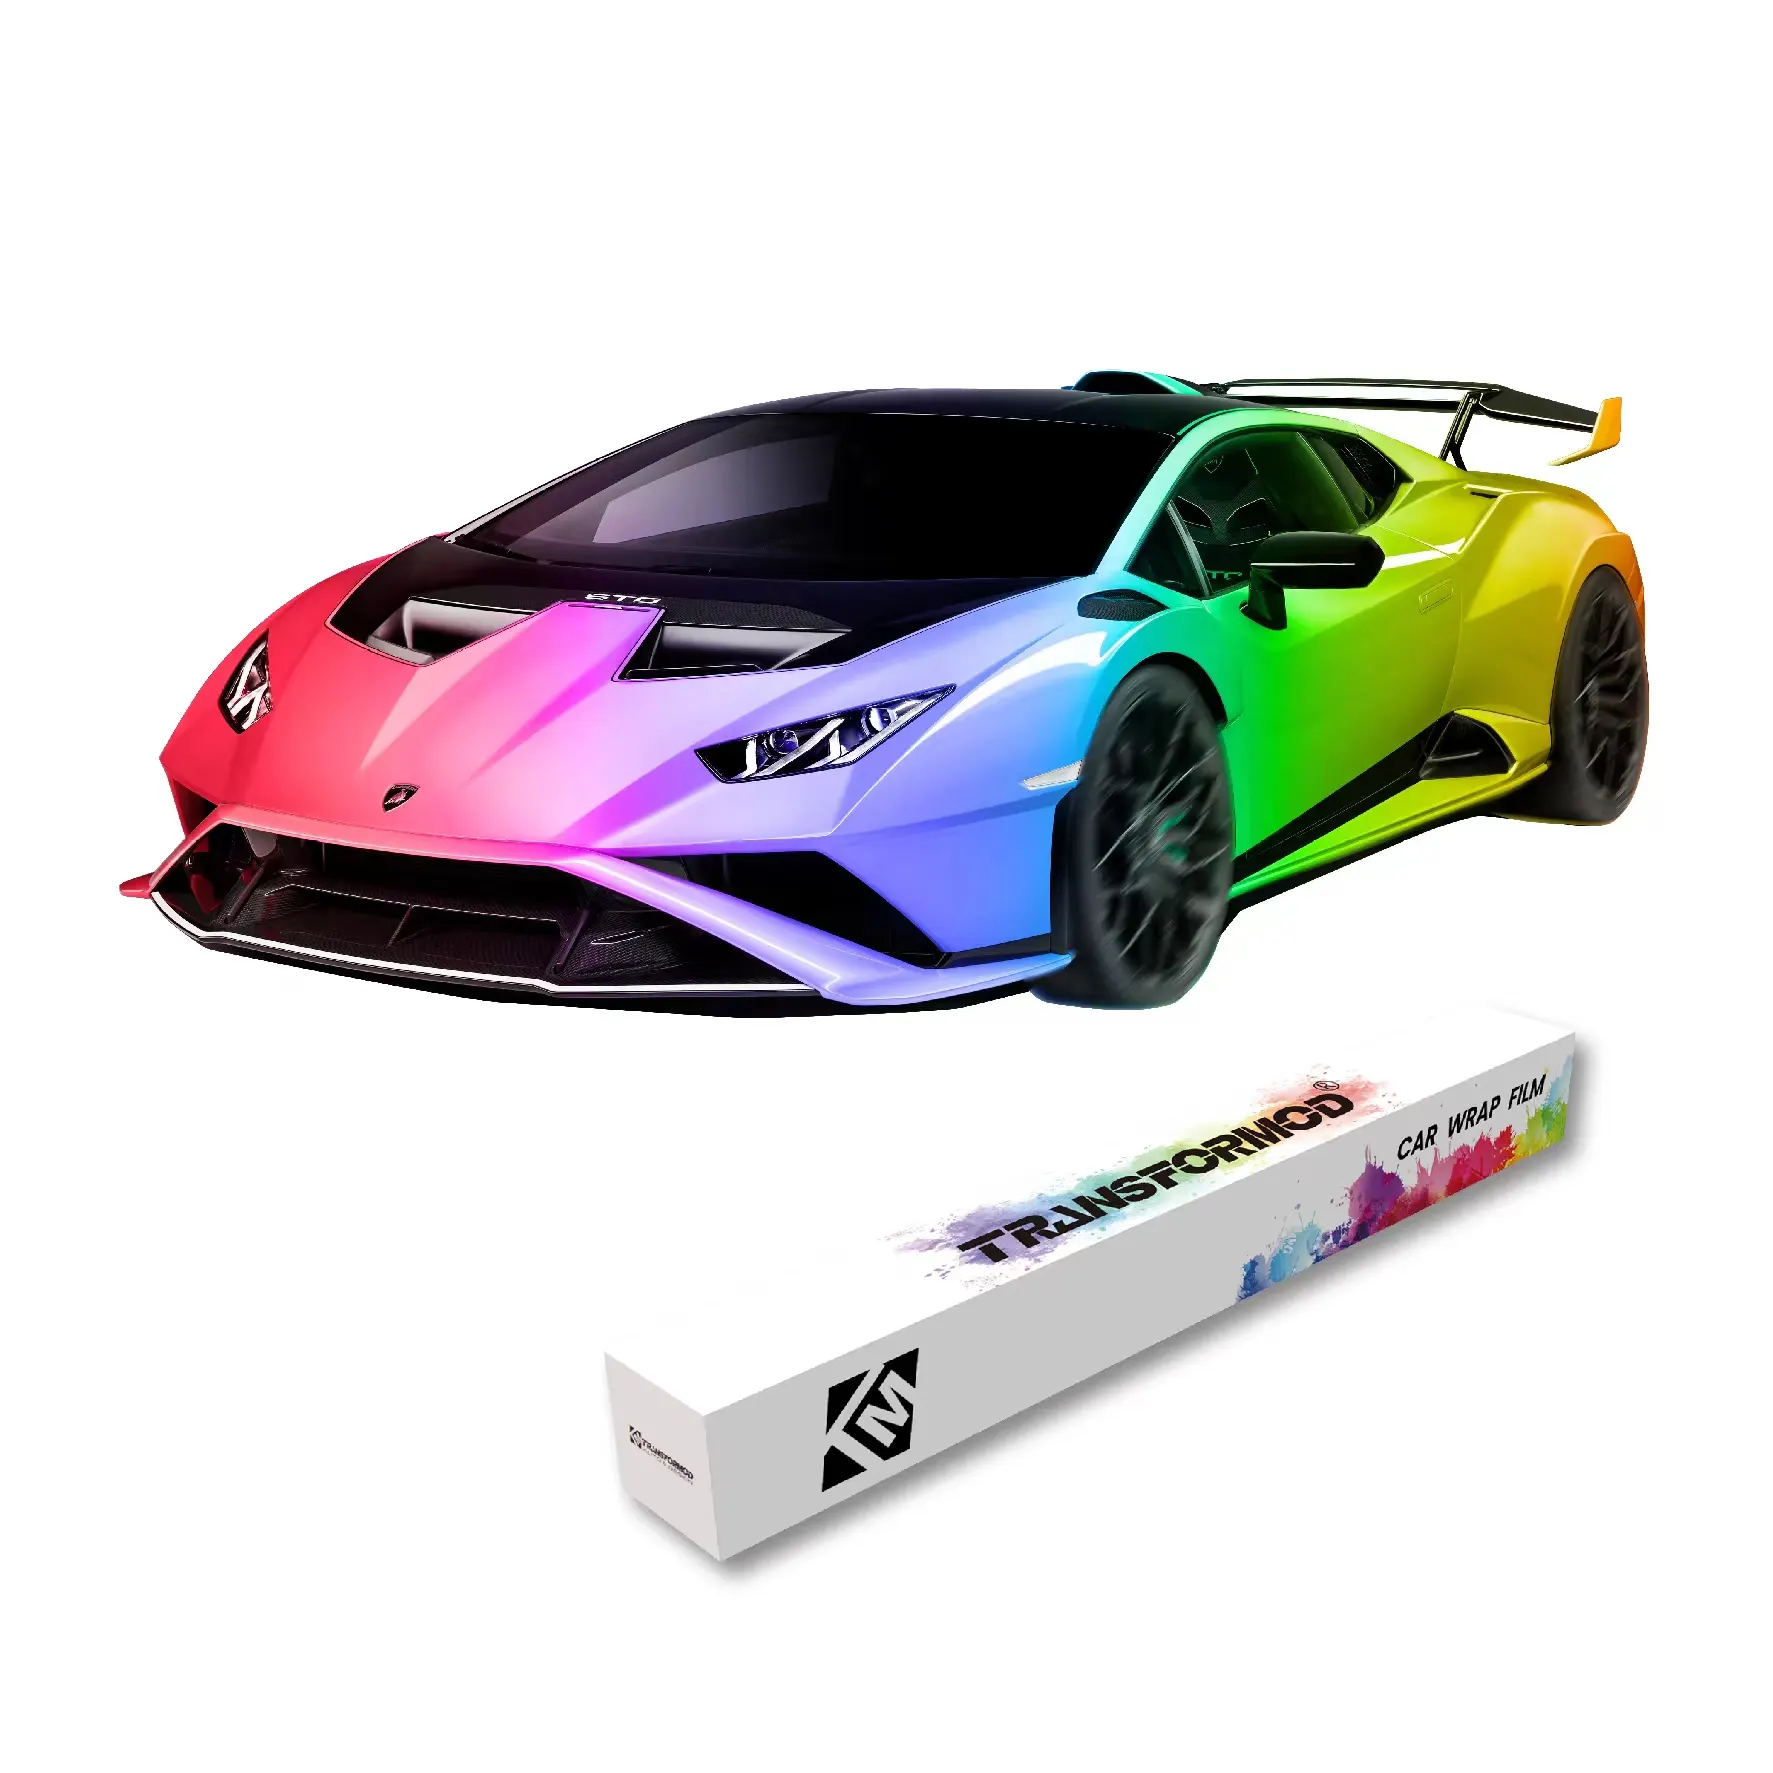 High Quality PVC Satin Metallic Color Change Wraps Vehicle Car Wrap Vinyl with Anti-Scratch Function for Body Position